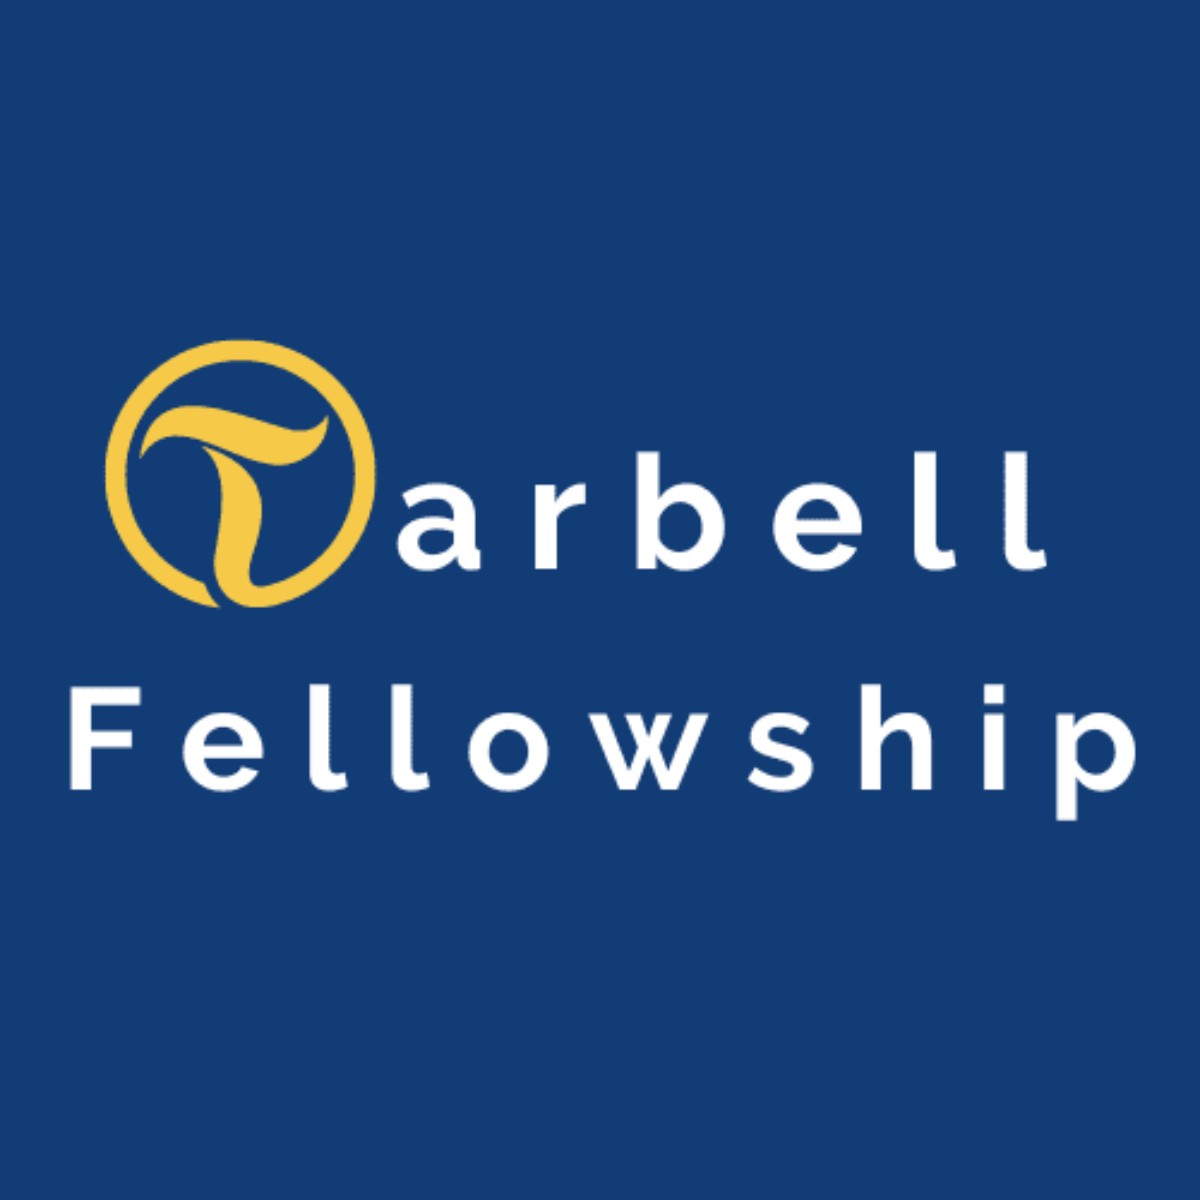 Tarbell 2023 Fellowship for Early-Career Journalists